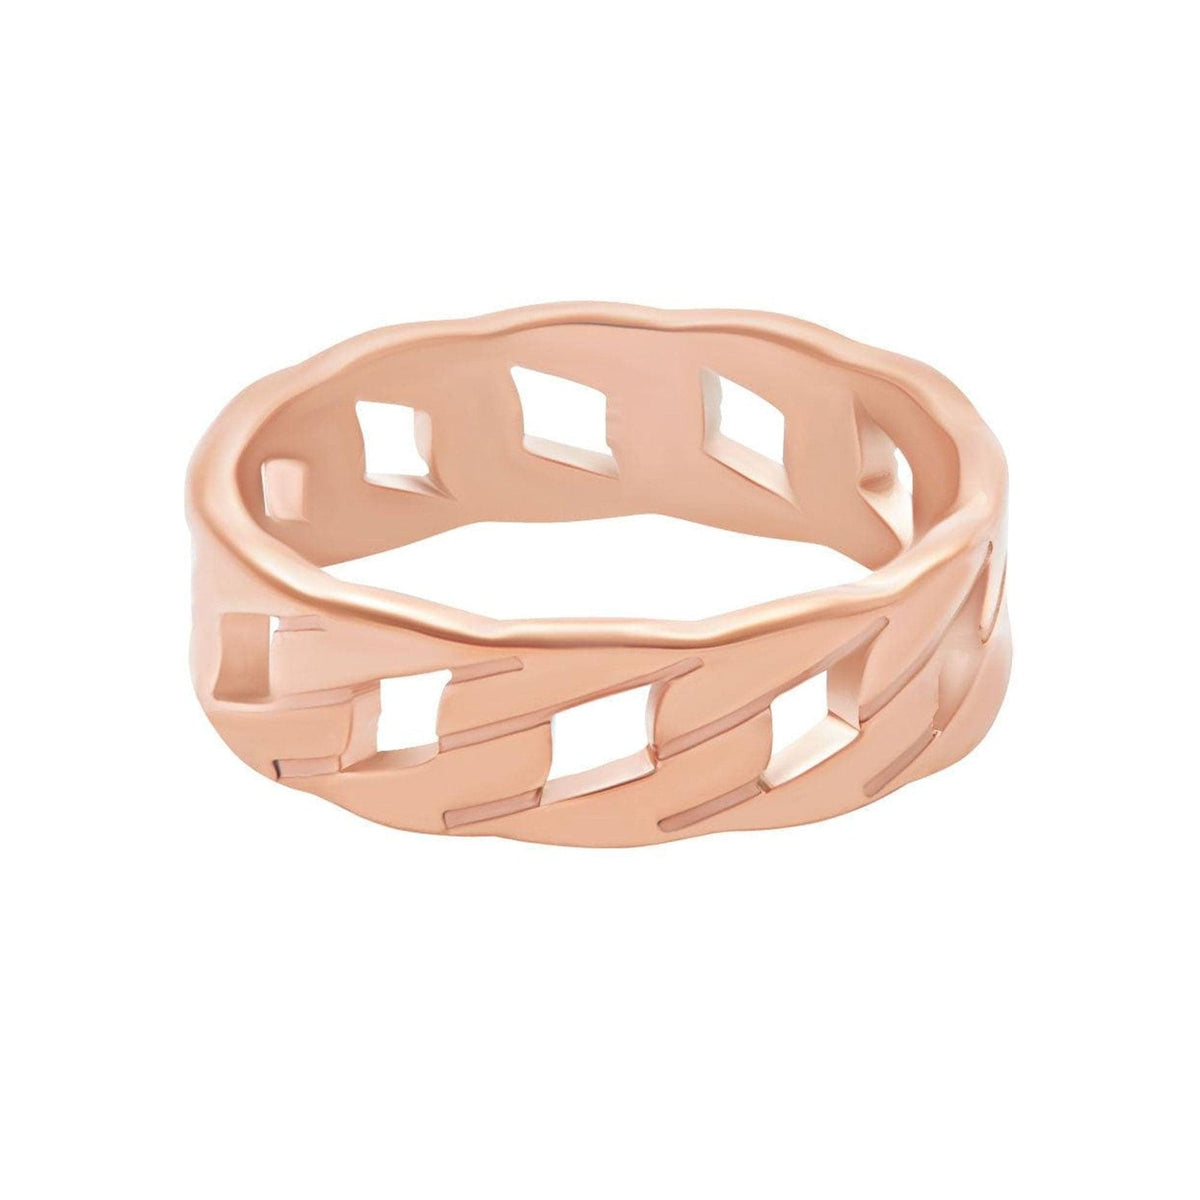 BohoMoon Stainless Steel Cassie Chain Ring Rose Gold / US 6 / UK L / EUR 51 (small)